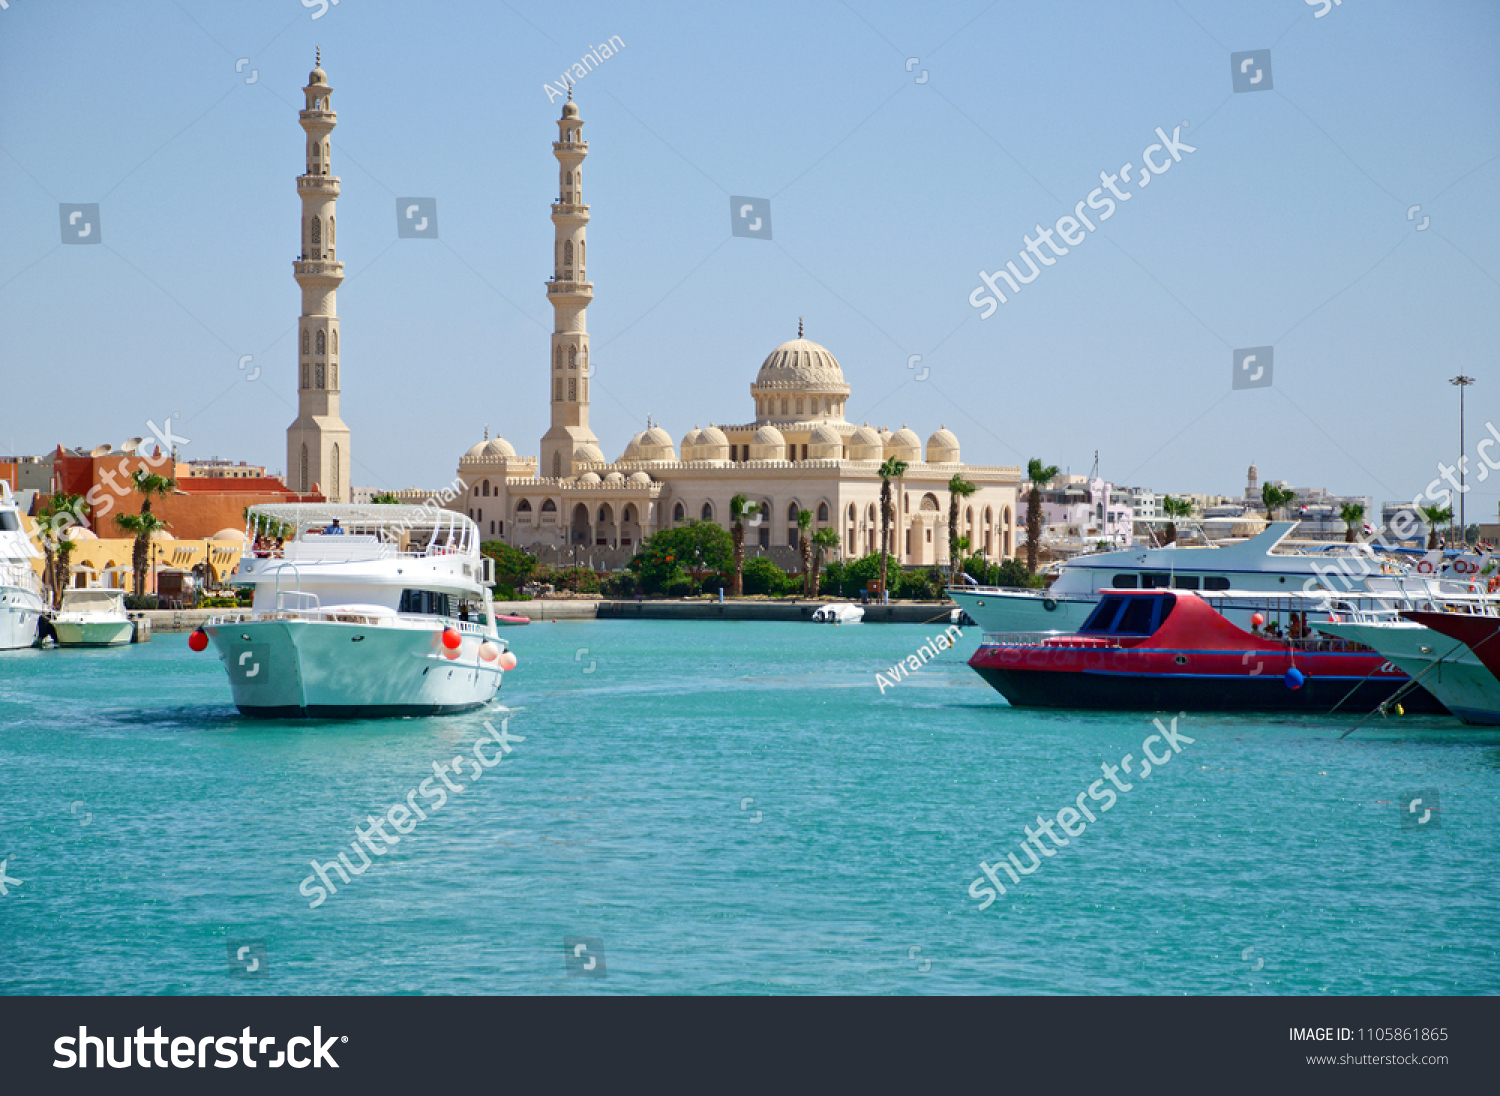 Seascape with motor yachts in marina. View of mosque  in the  background. Hurghada, Egypt #1105861865